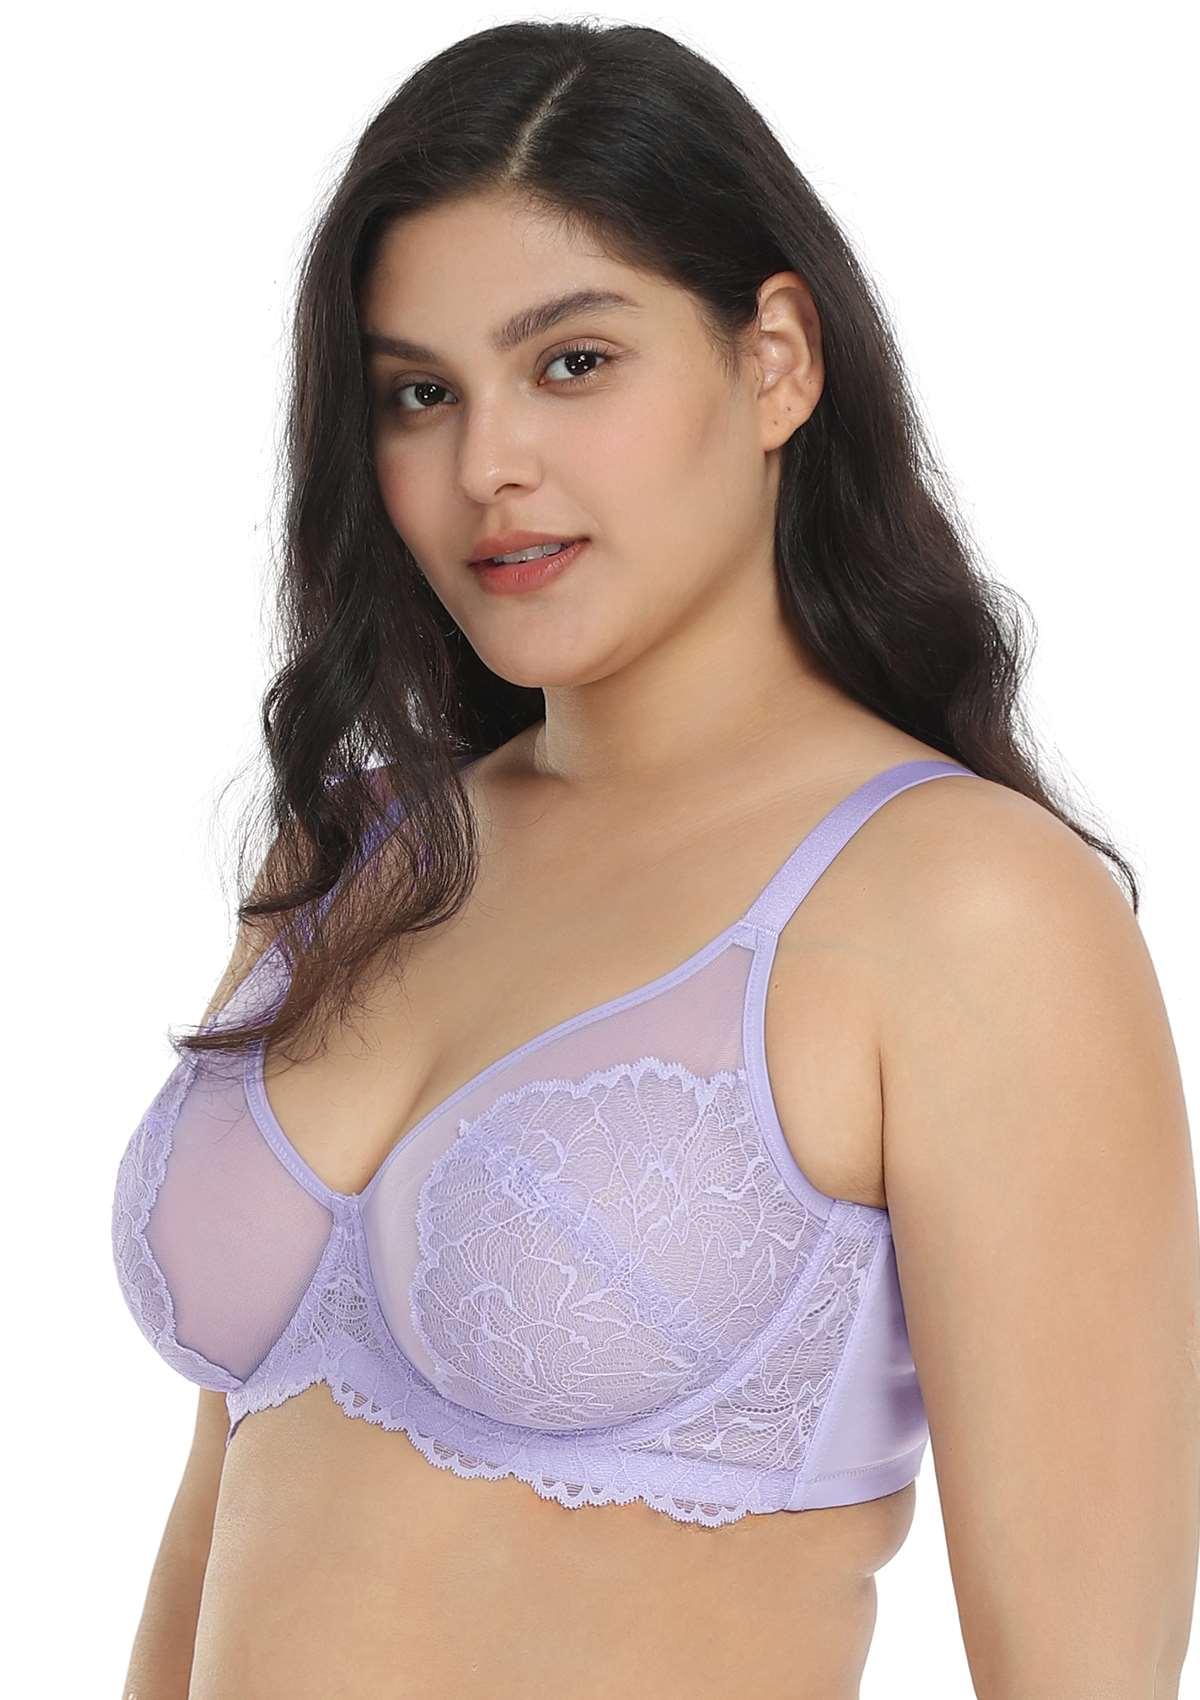 HSIA Blossom Transparent Lace Bra: Plus Size Wired Back Smoothing Bra - Light Purple / 36 / H